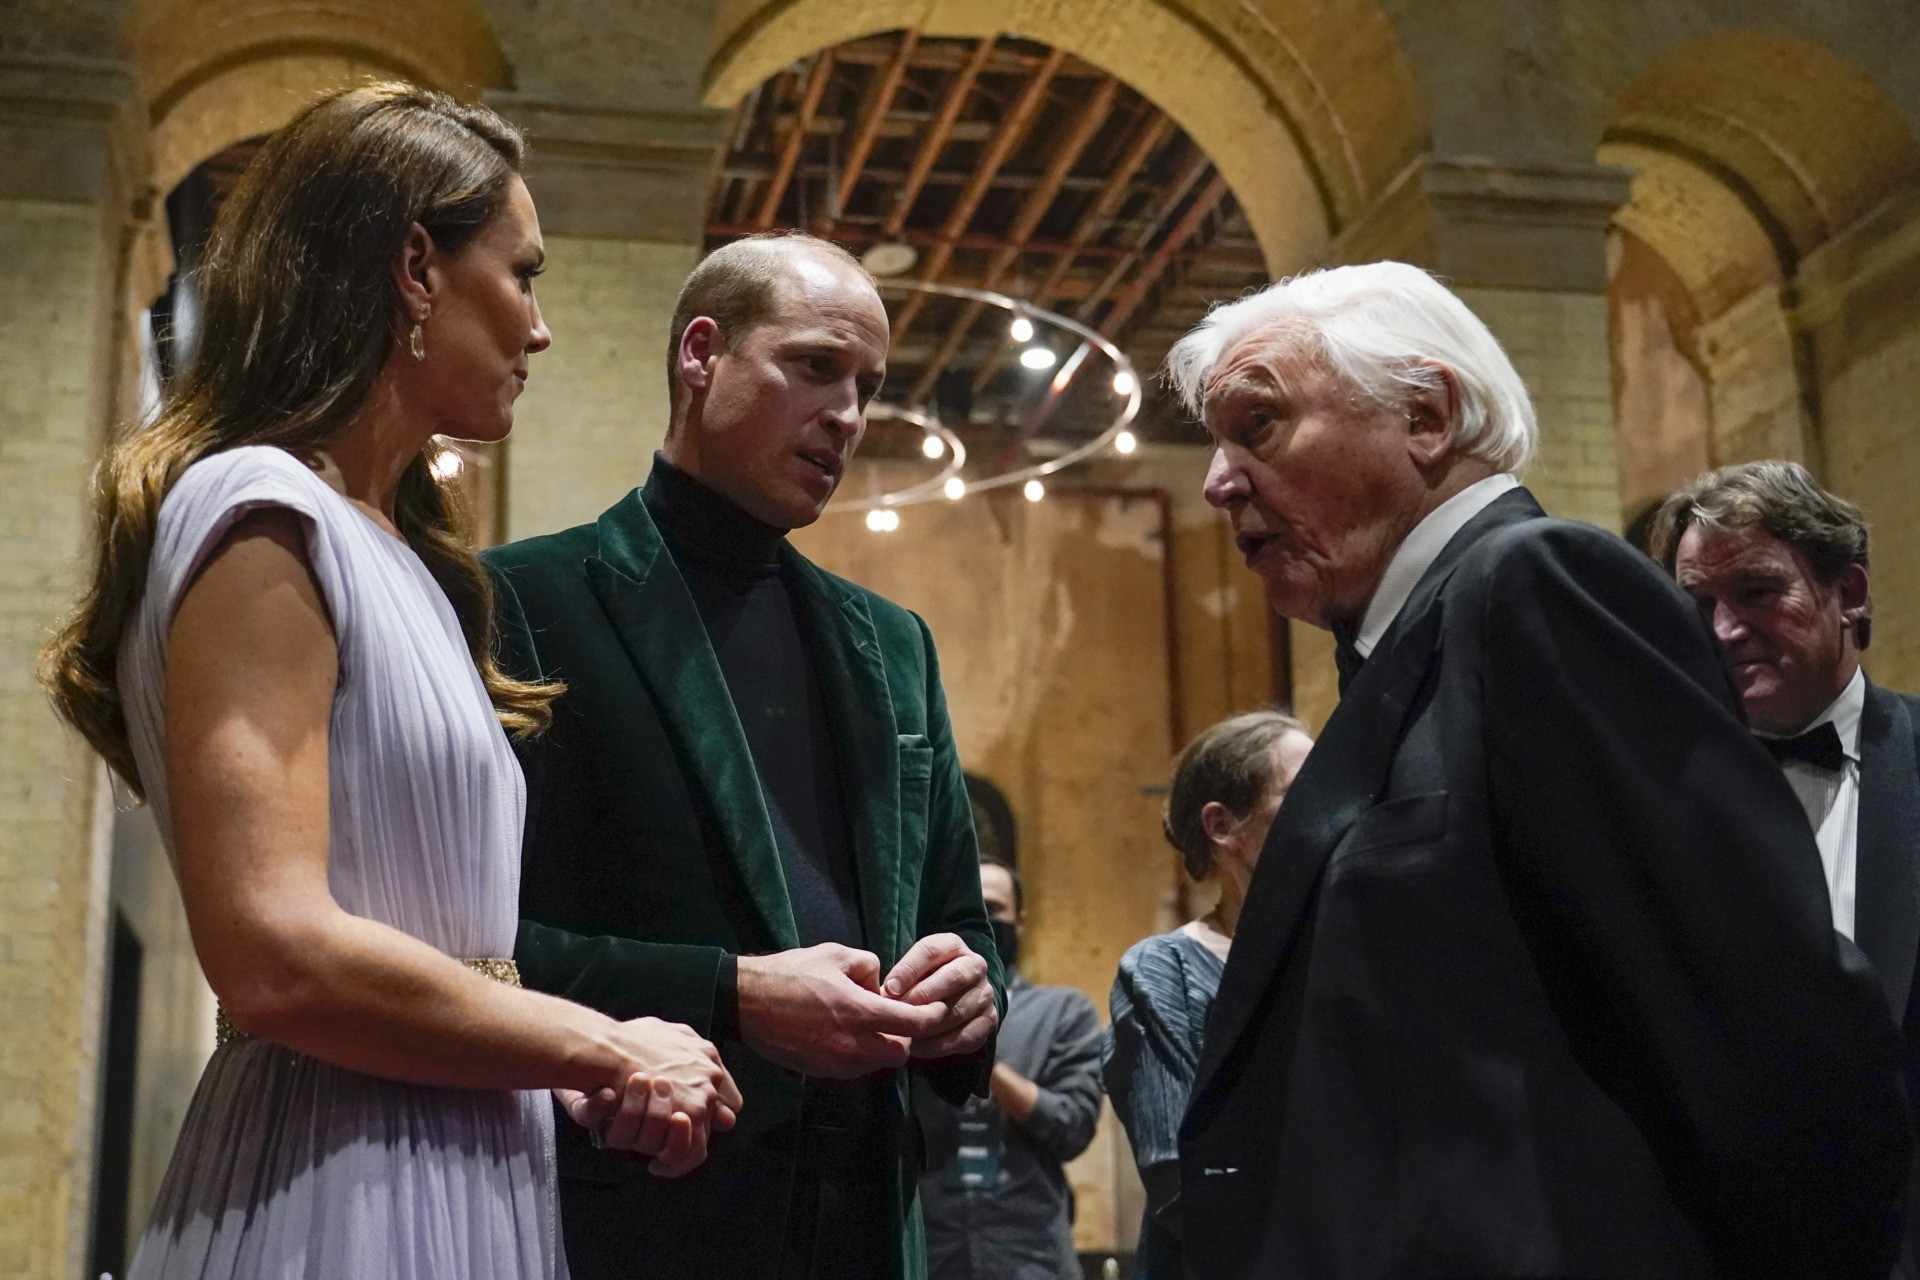 LONDON, ENGLAND - OCTOBER 17: Prince William, Duke of Cambridge and Catherine, Duchess of Cambridge talk with broadcaster Sir David Attenborough during the 2021 Earthshot Prize Awards Ceremony at Alexandra Palace on October 17, 2021 in London, England. (Photo by Alberto Pezzali - WPA Pool/Getty Images)